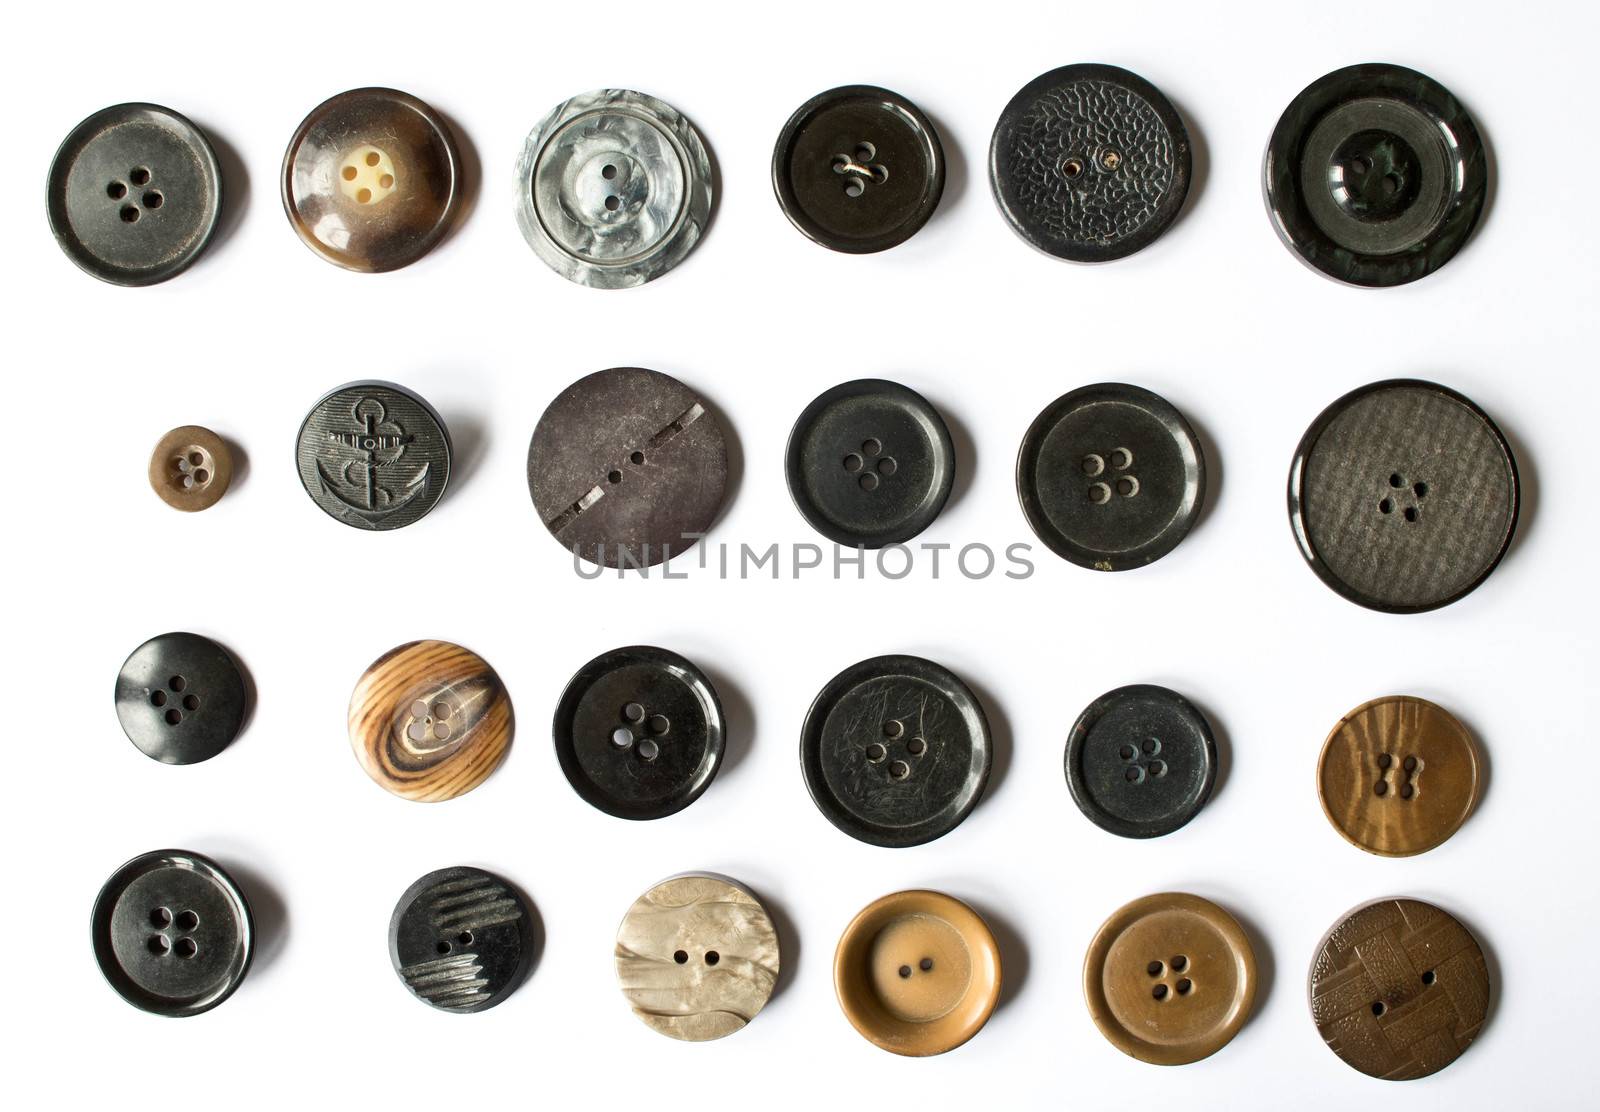 A Collection of Multicolour Different Size Buttons  by shellystill